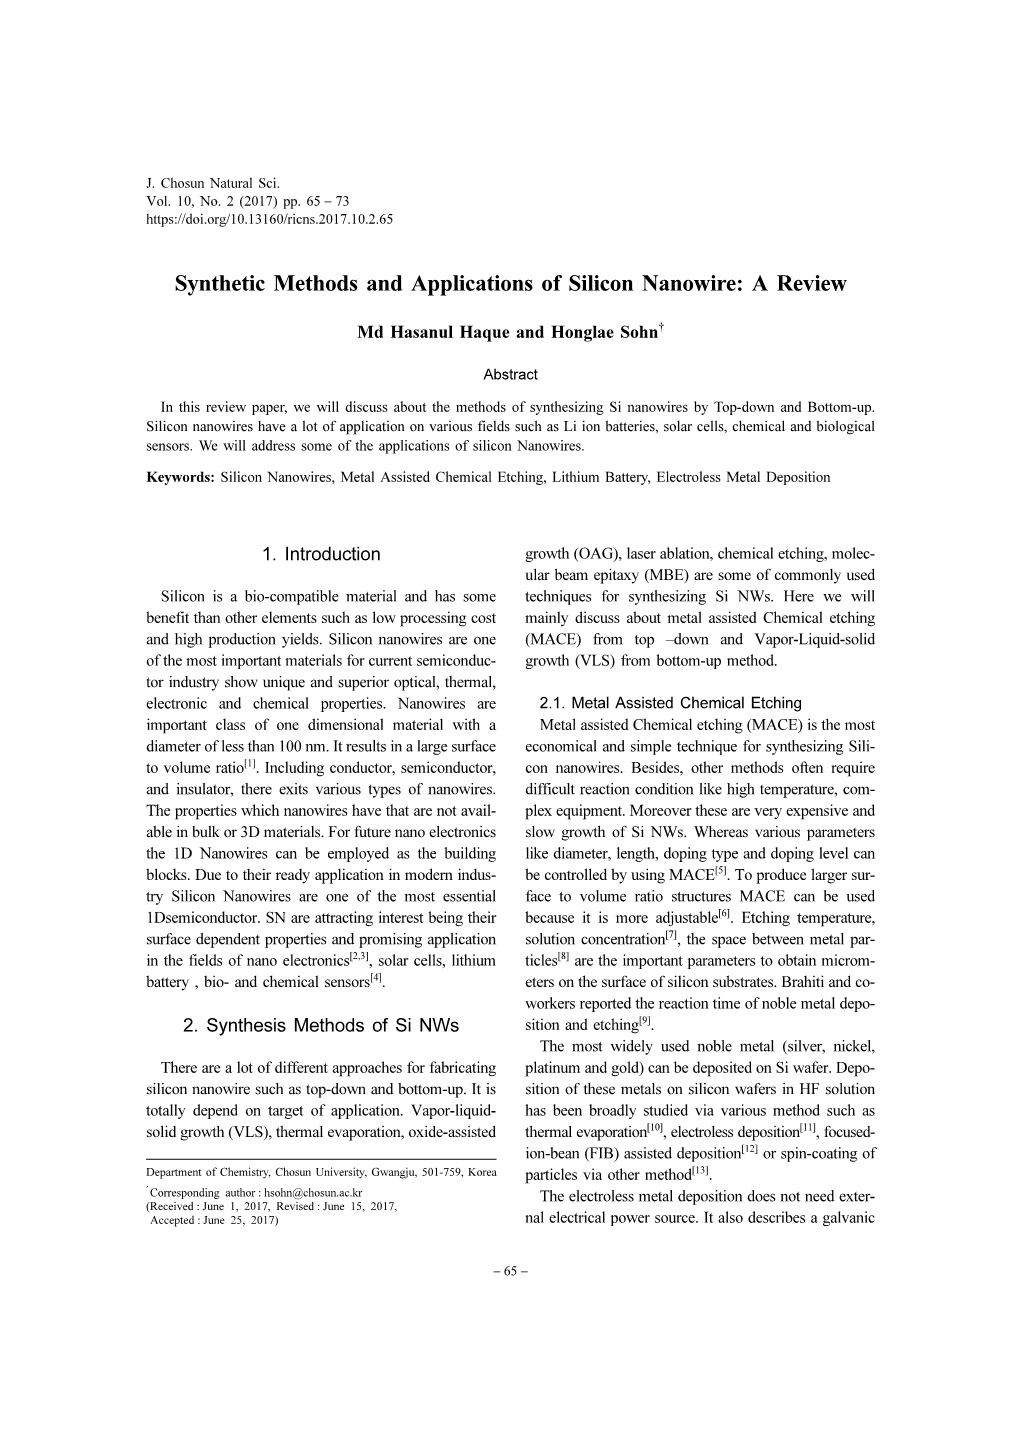 Synthetic Methods and Applications of Silicon Nanowire: a Review